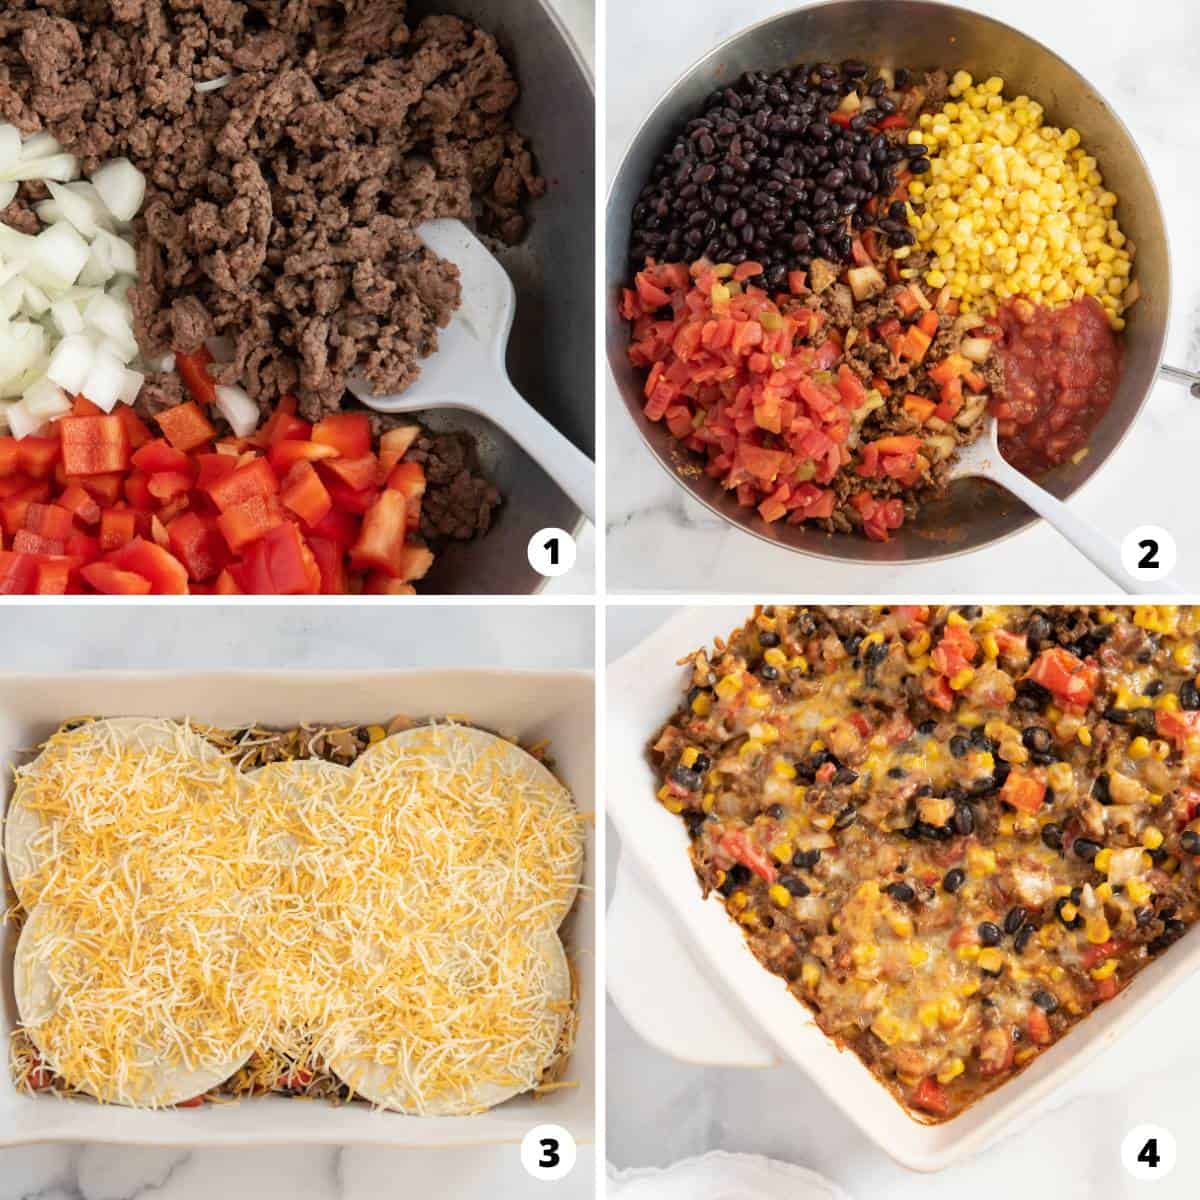 Showing how to make Mexican lasagna in a 4 step collage.